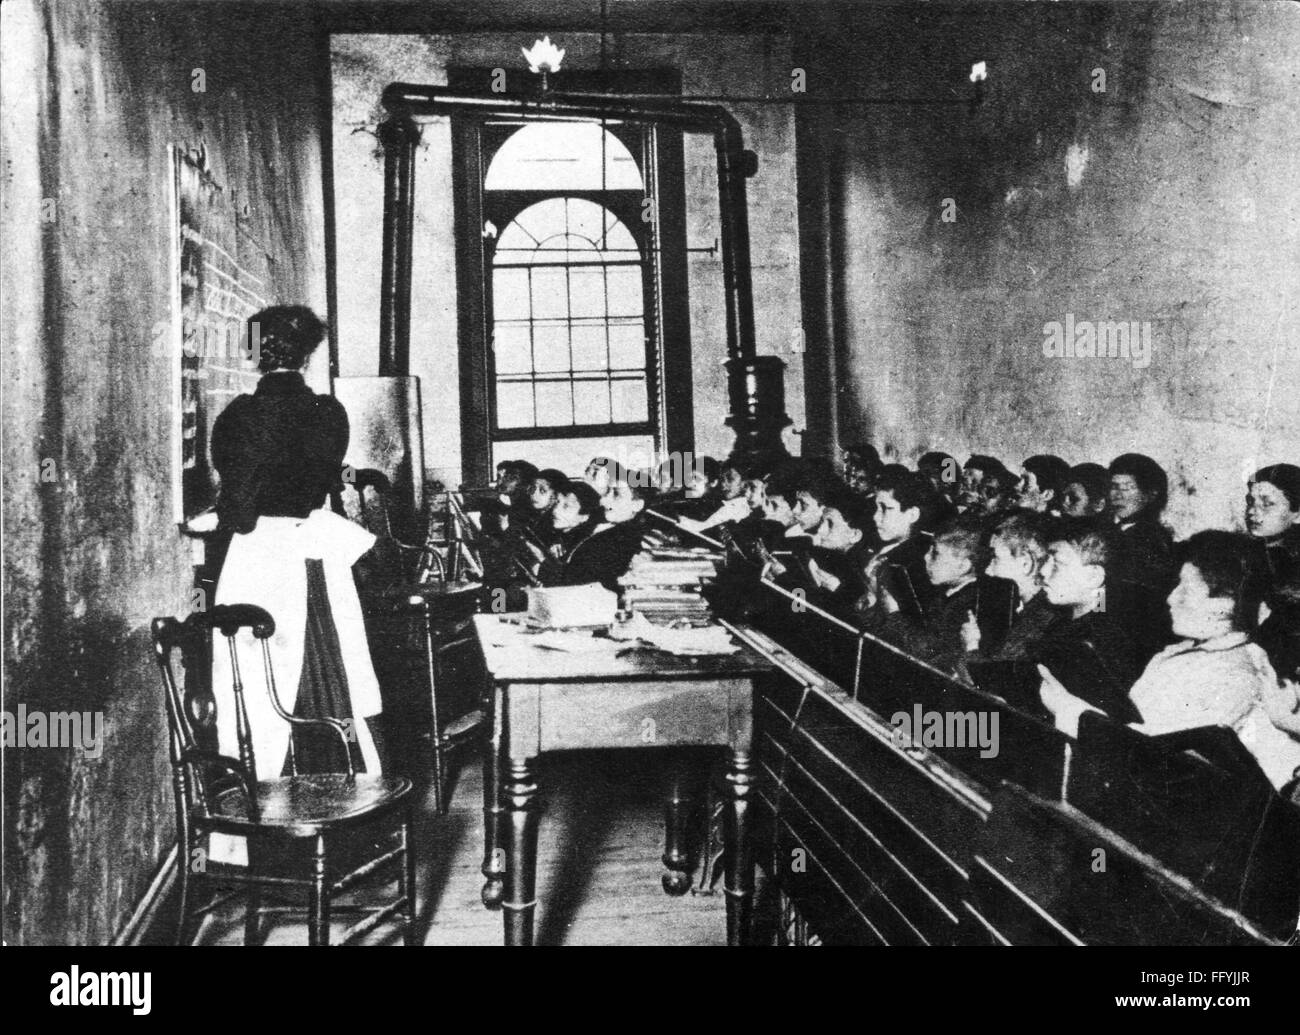 pedagogy, school / lessons / discipline, school for immgrant children, Essex Market Street, New York, 1887, Additional-Rights-Clearences-Not Available Stock Photo